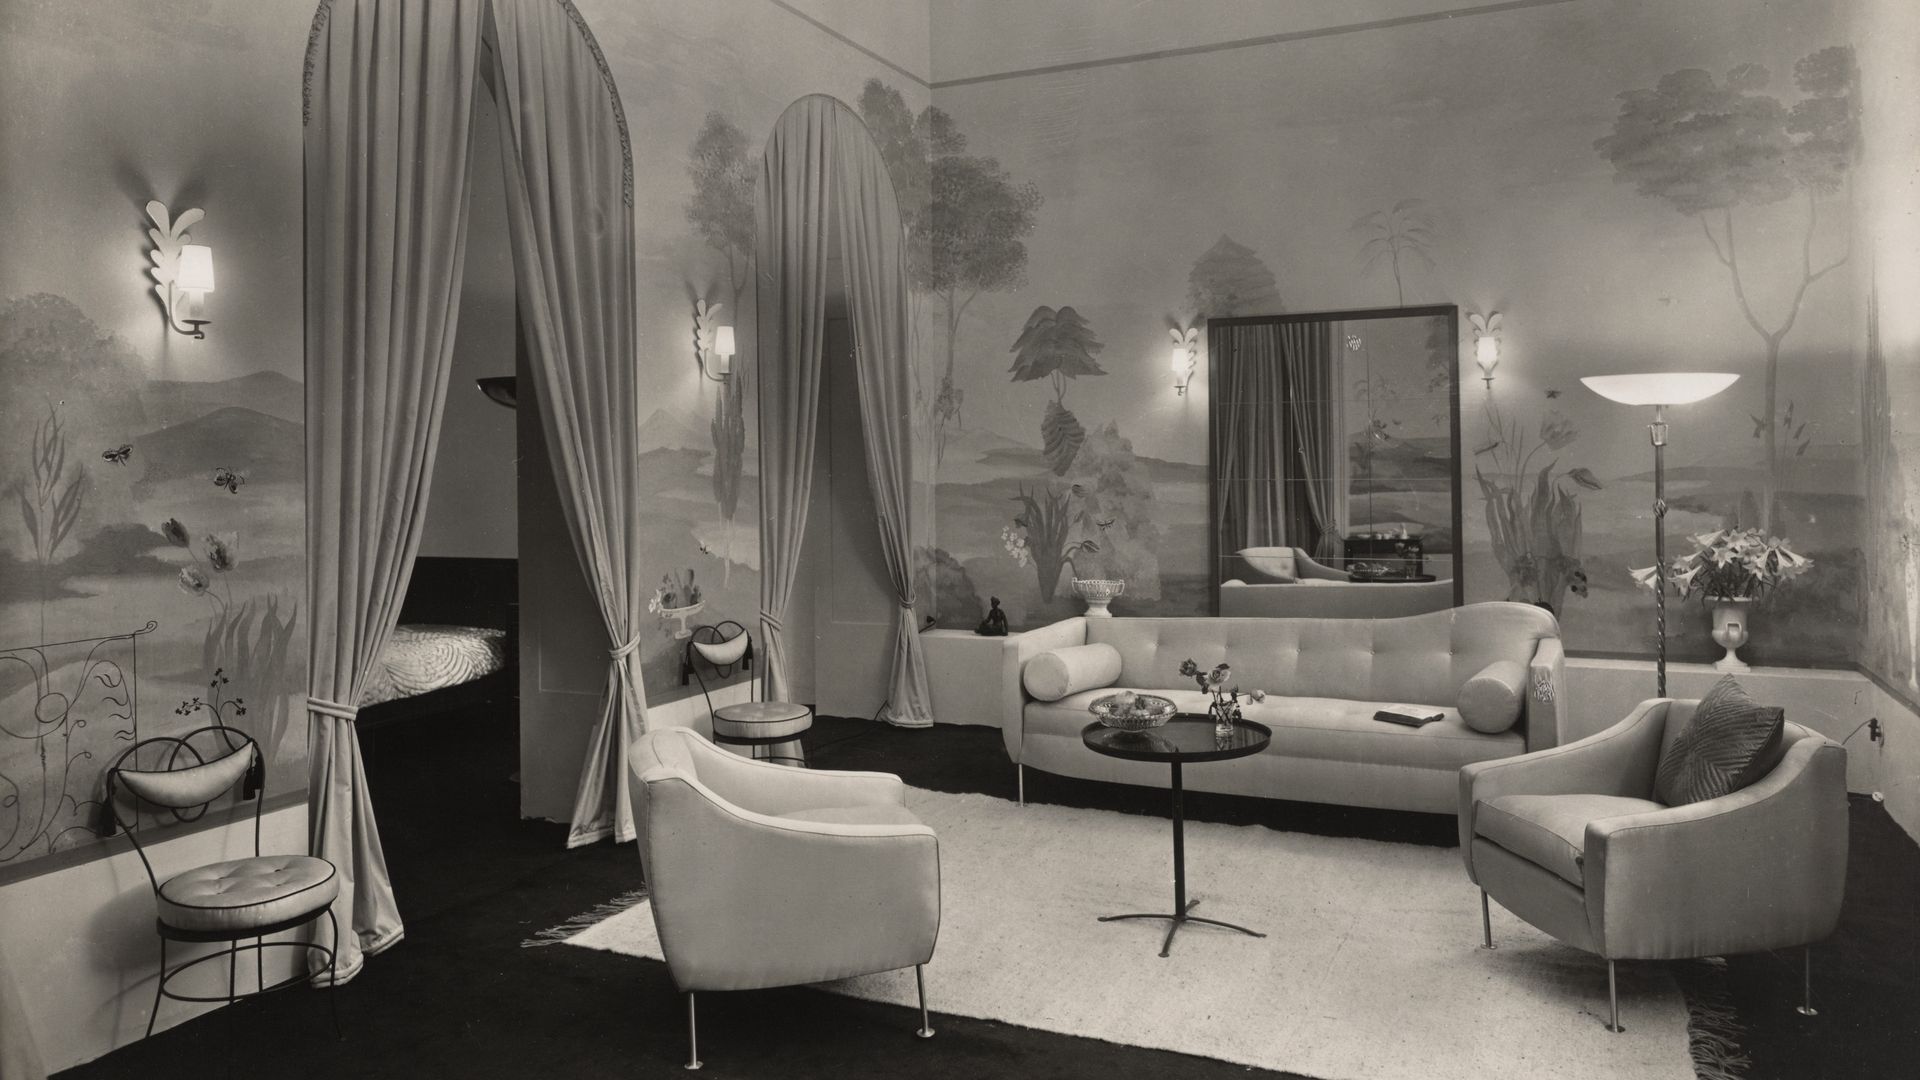 Max Krajewsky, Woman's living room with view at the bedroom by Ruth Hildegard Geyer-Raack, exhibition in the furnishing house "Meisterräume" Berlin, c. 1936